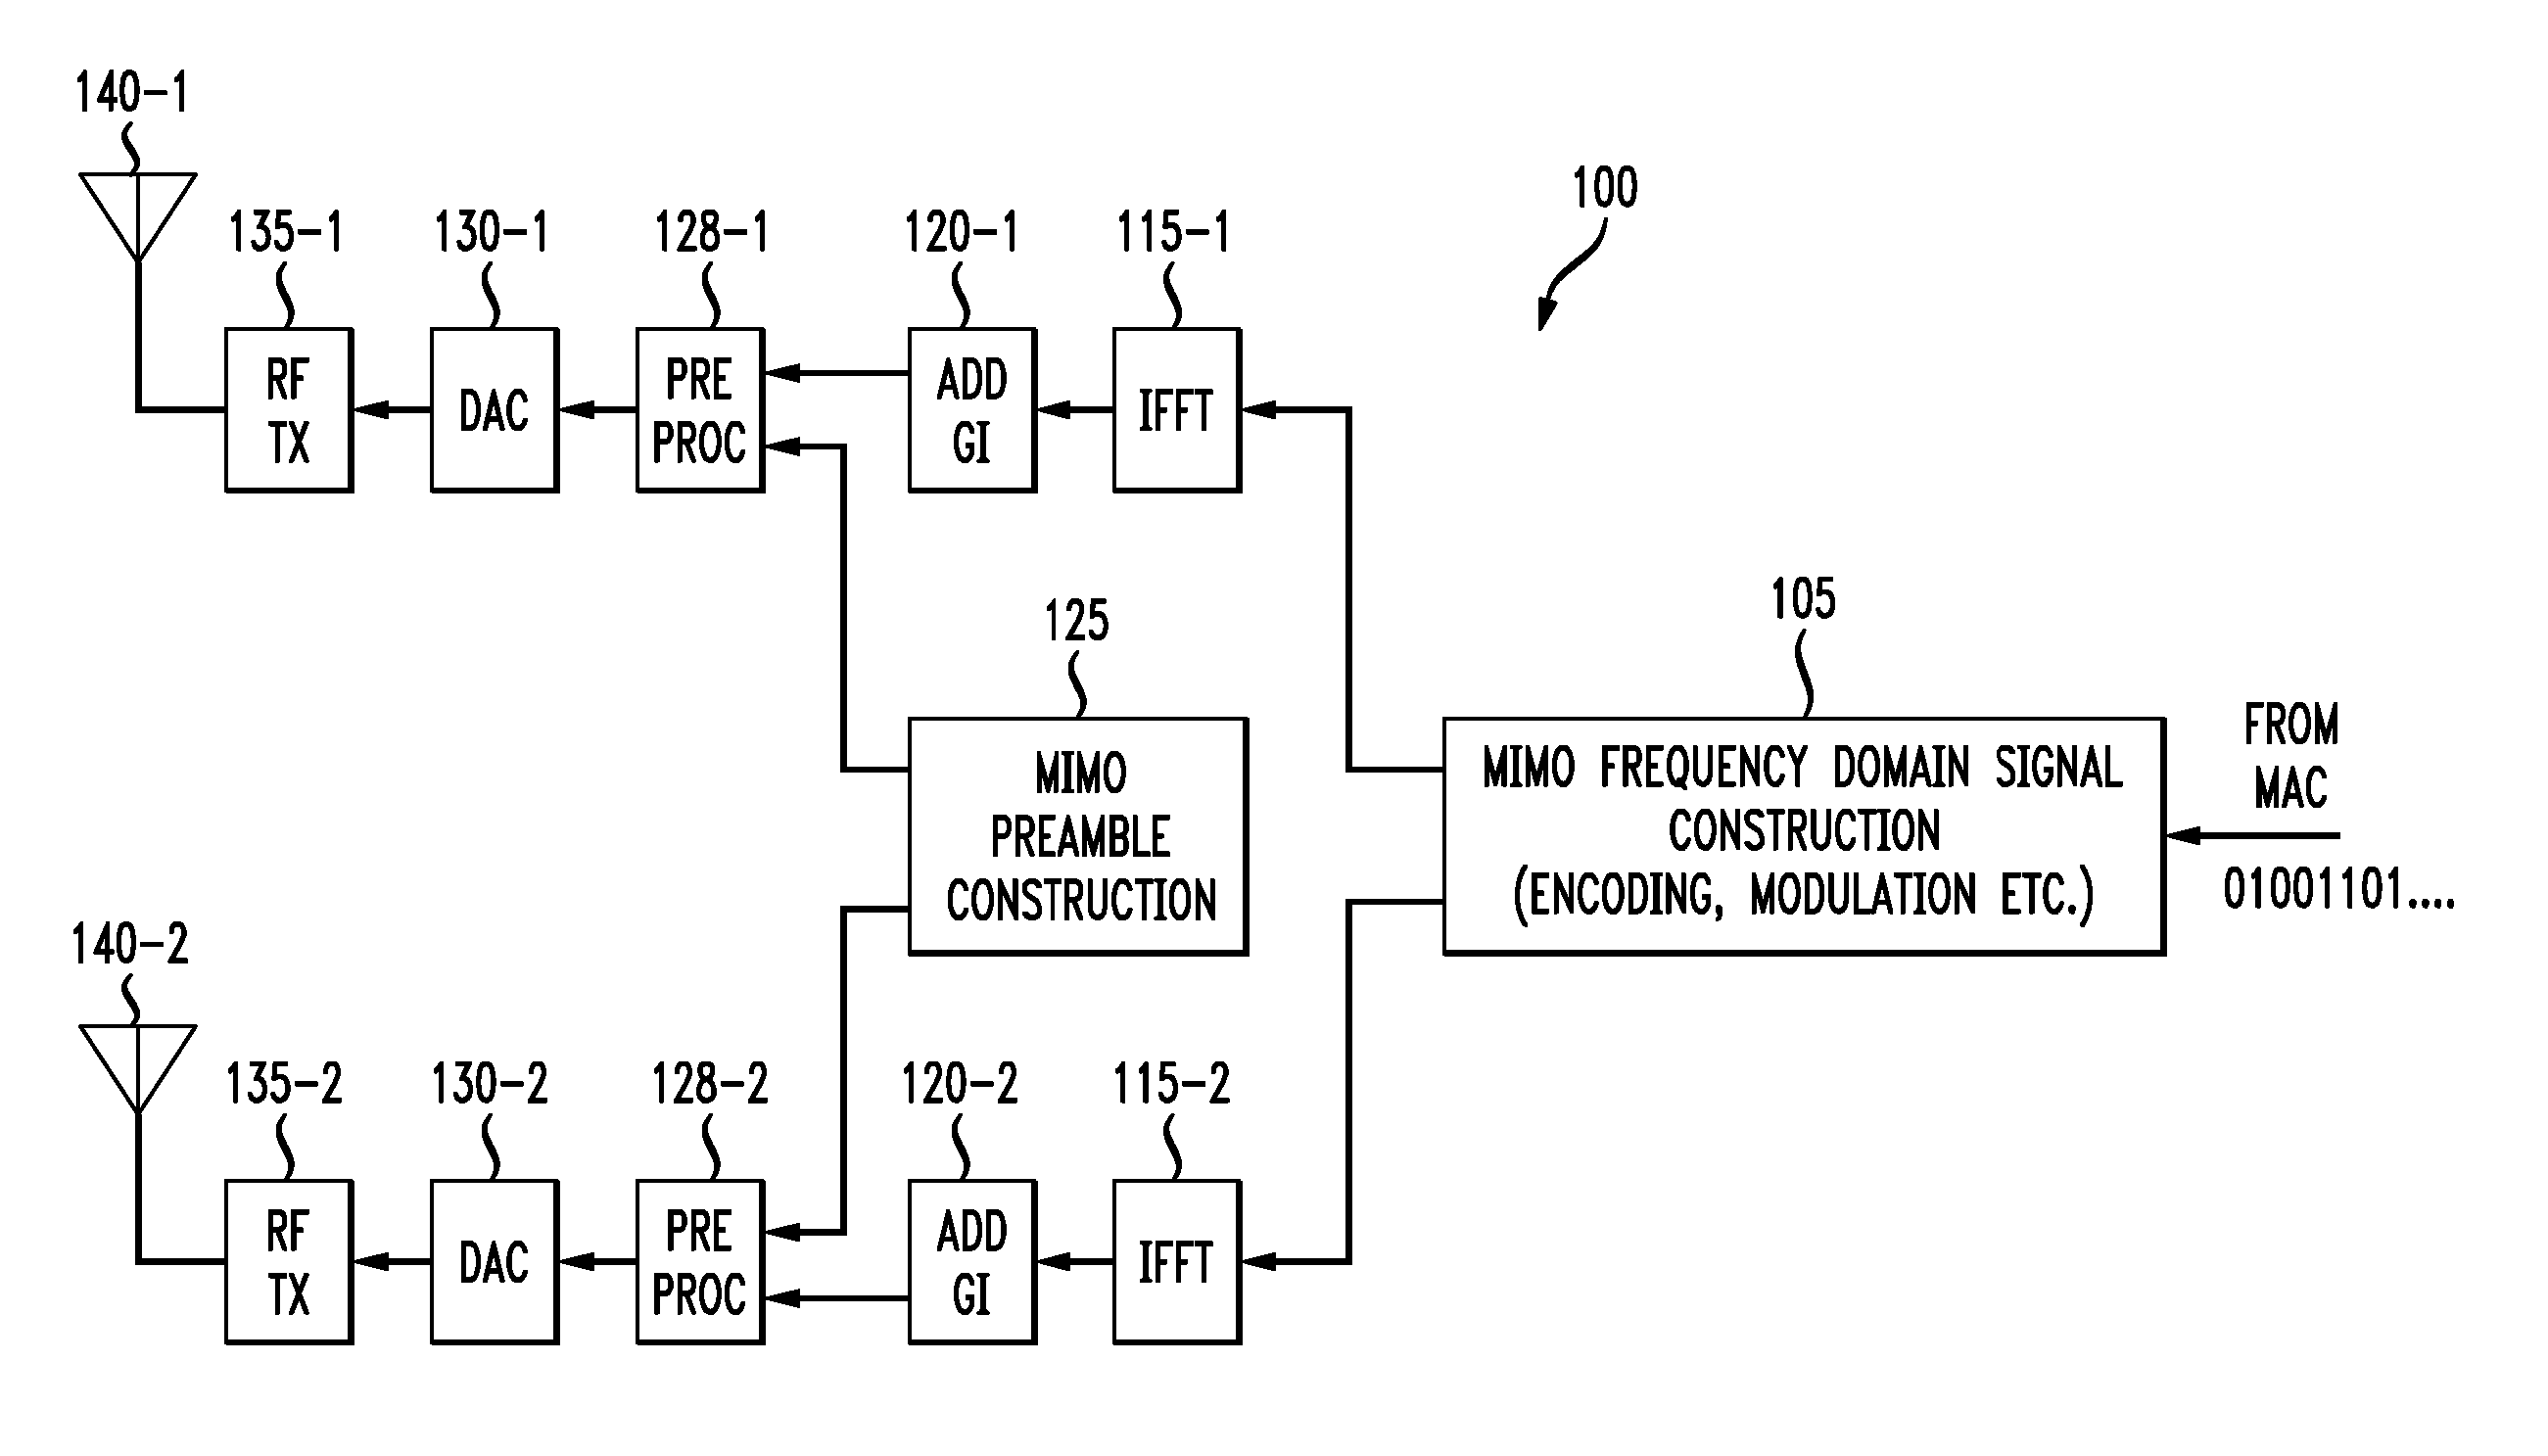 Method and apparatus for improved long preamble formats in a multiple antenna communication system